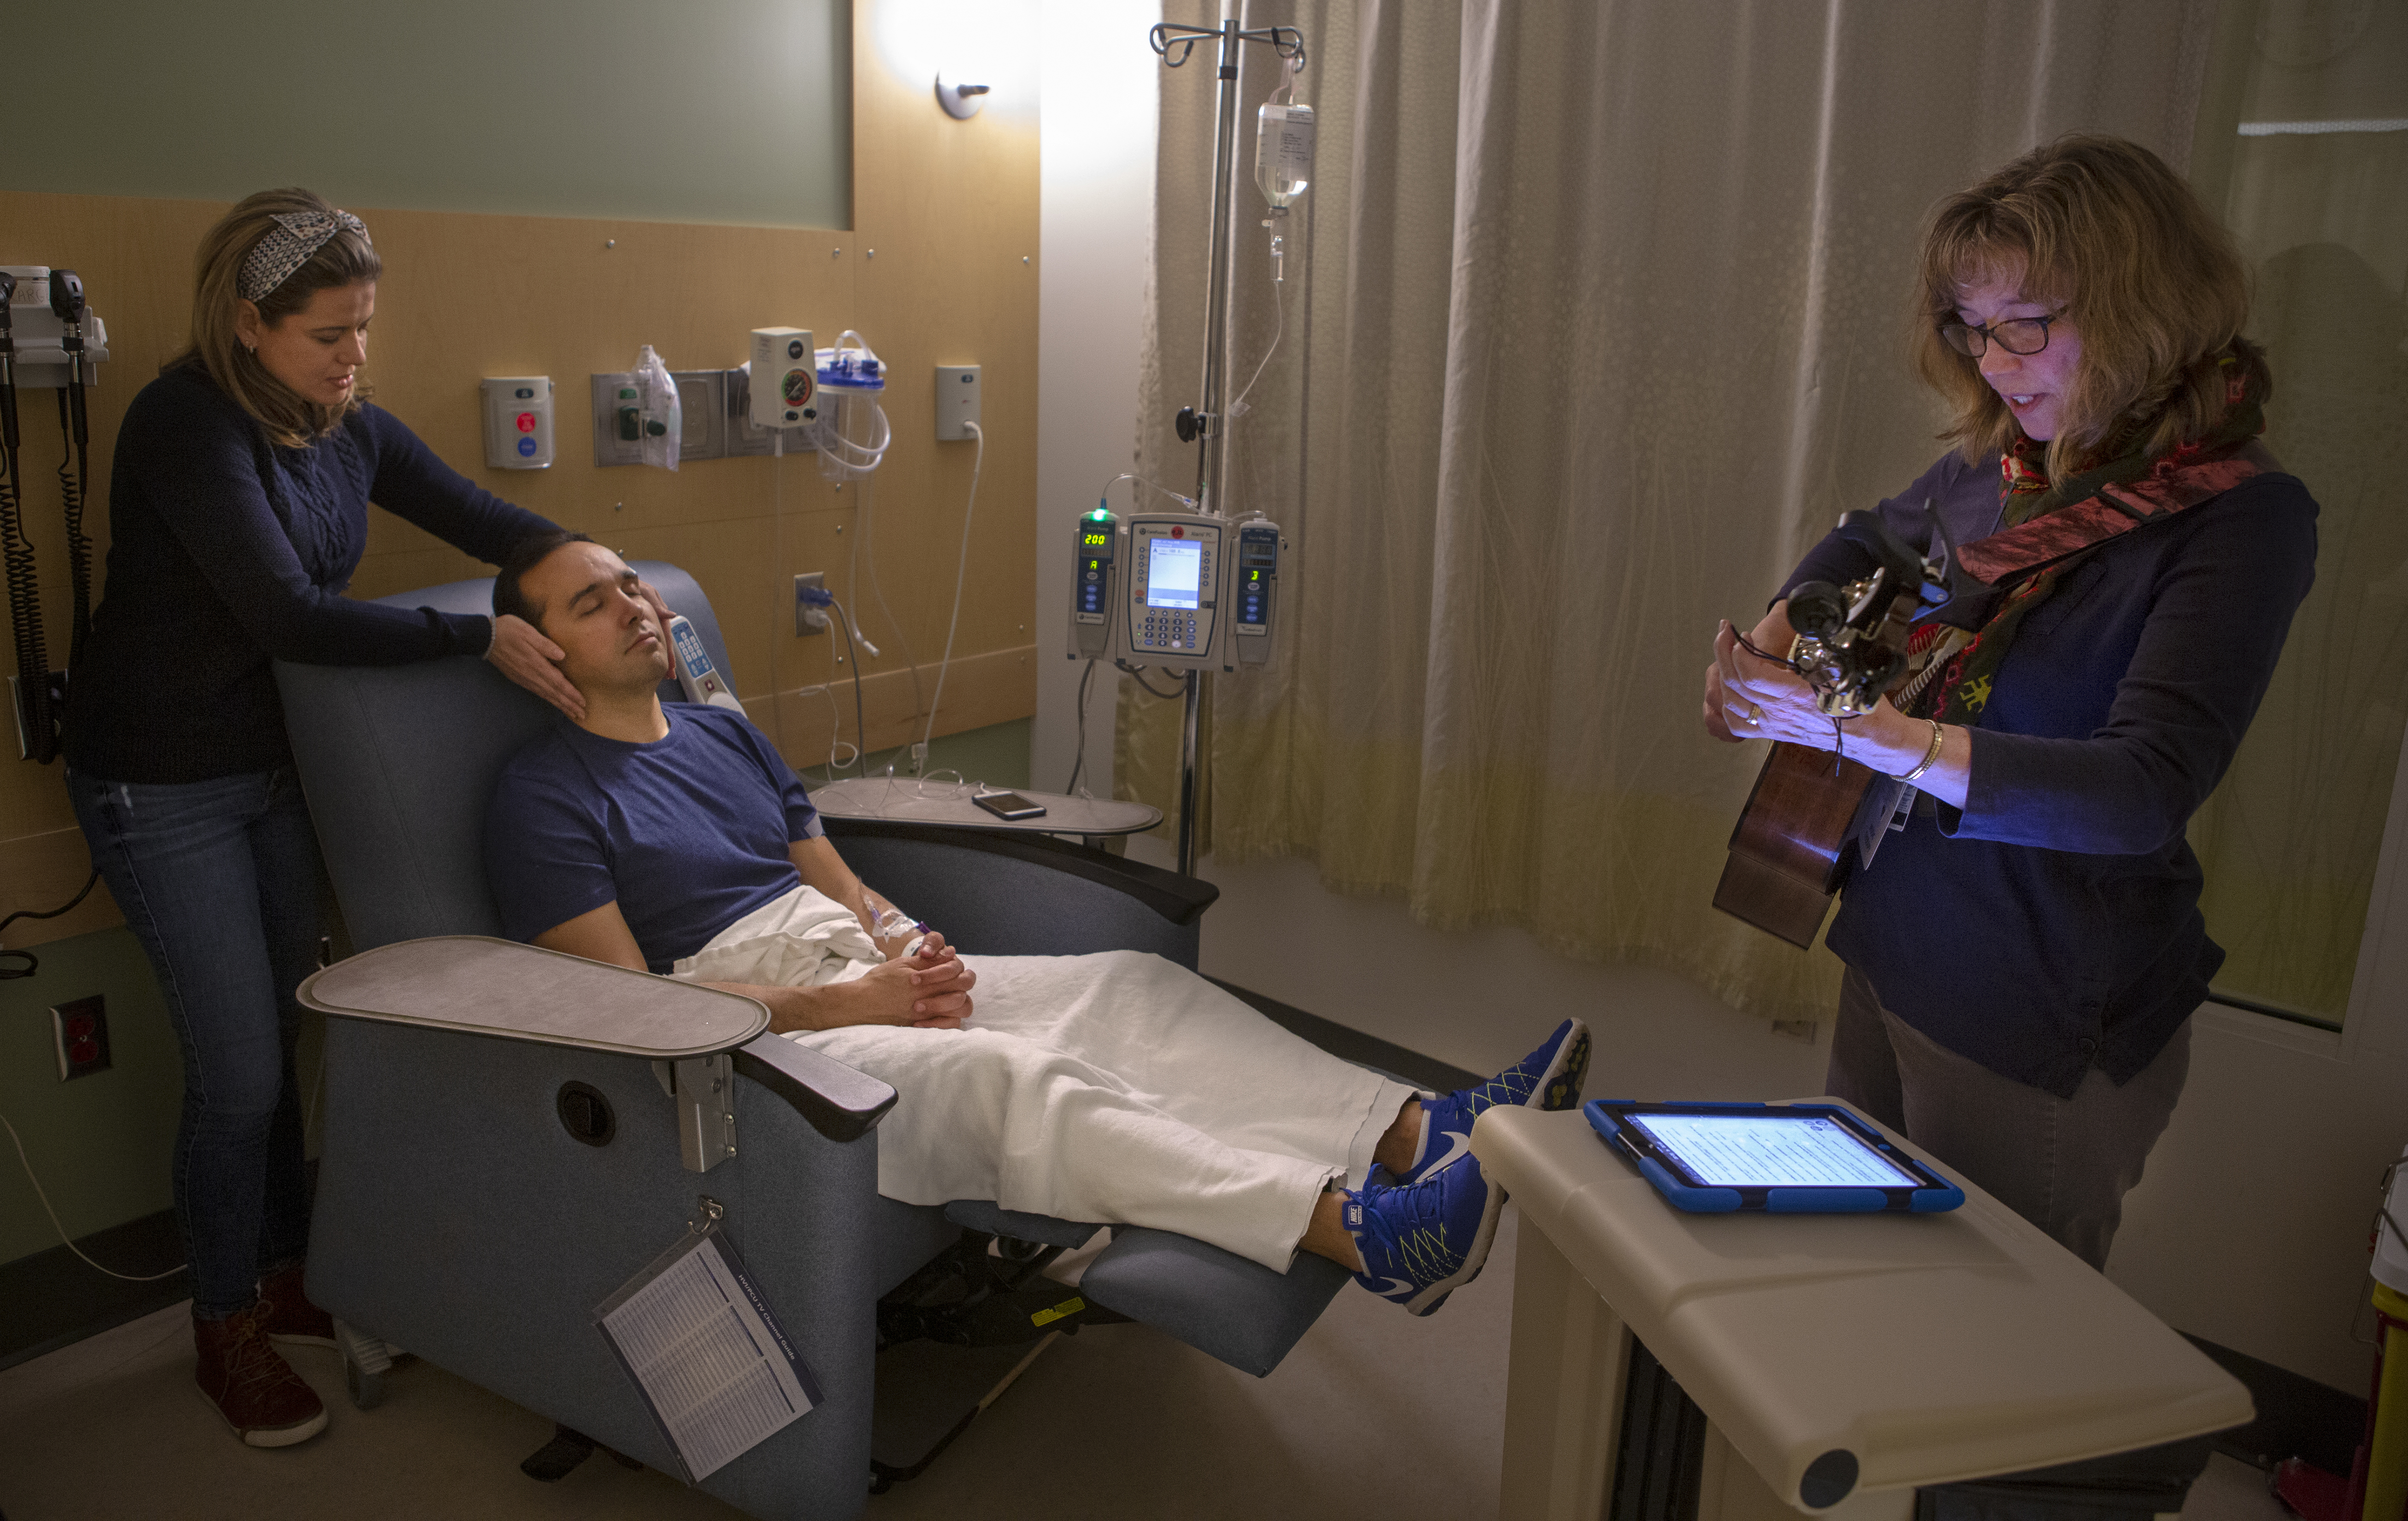 Jan Stouffer, a board-certified music therapist at Penn State Health Milton S. Hershey Medical Center, plays the guitar for Vladimire de Abreu and his wife, Samia, during an infusion session at Penn State Cancer Institute. Stouffer is wearing a blue, long-sleeved shirt and khaki pants. Samia has her hands around her husband’s face as he lies in a chair with his eyes closed. She is wearing a blue shirt and jeans. Vladimire is lying with his feet up in a recliner and has an IV in his arm. His is wearing a blue T-shirt and white pants.